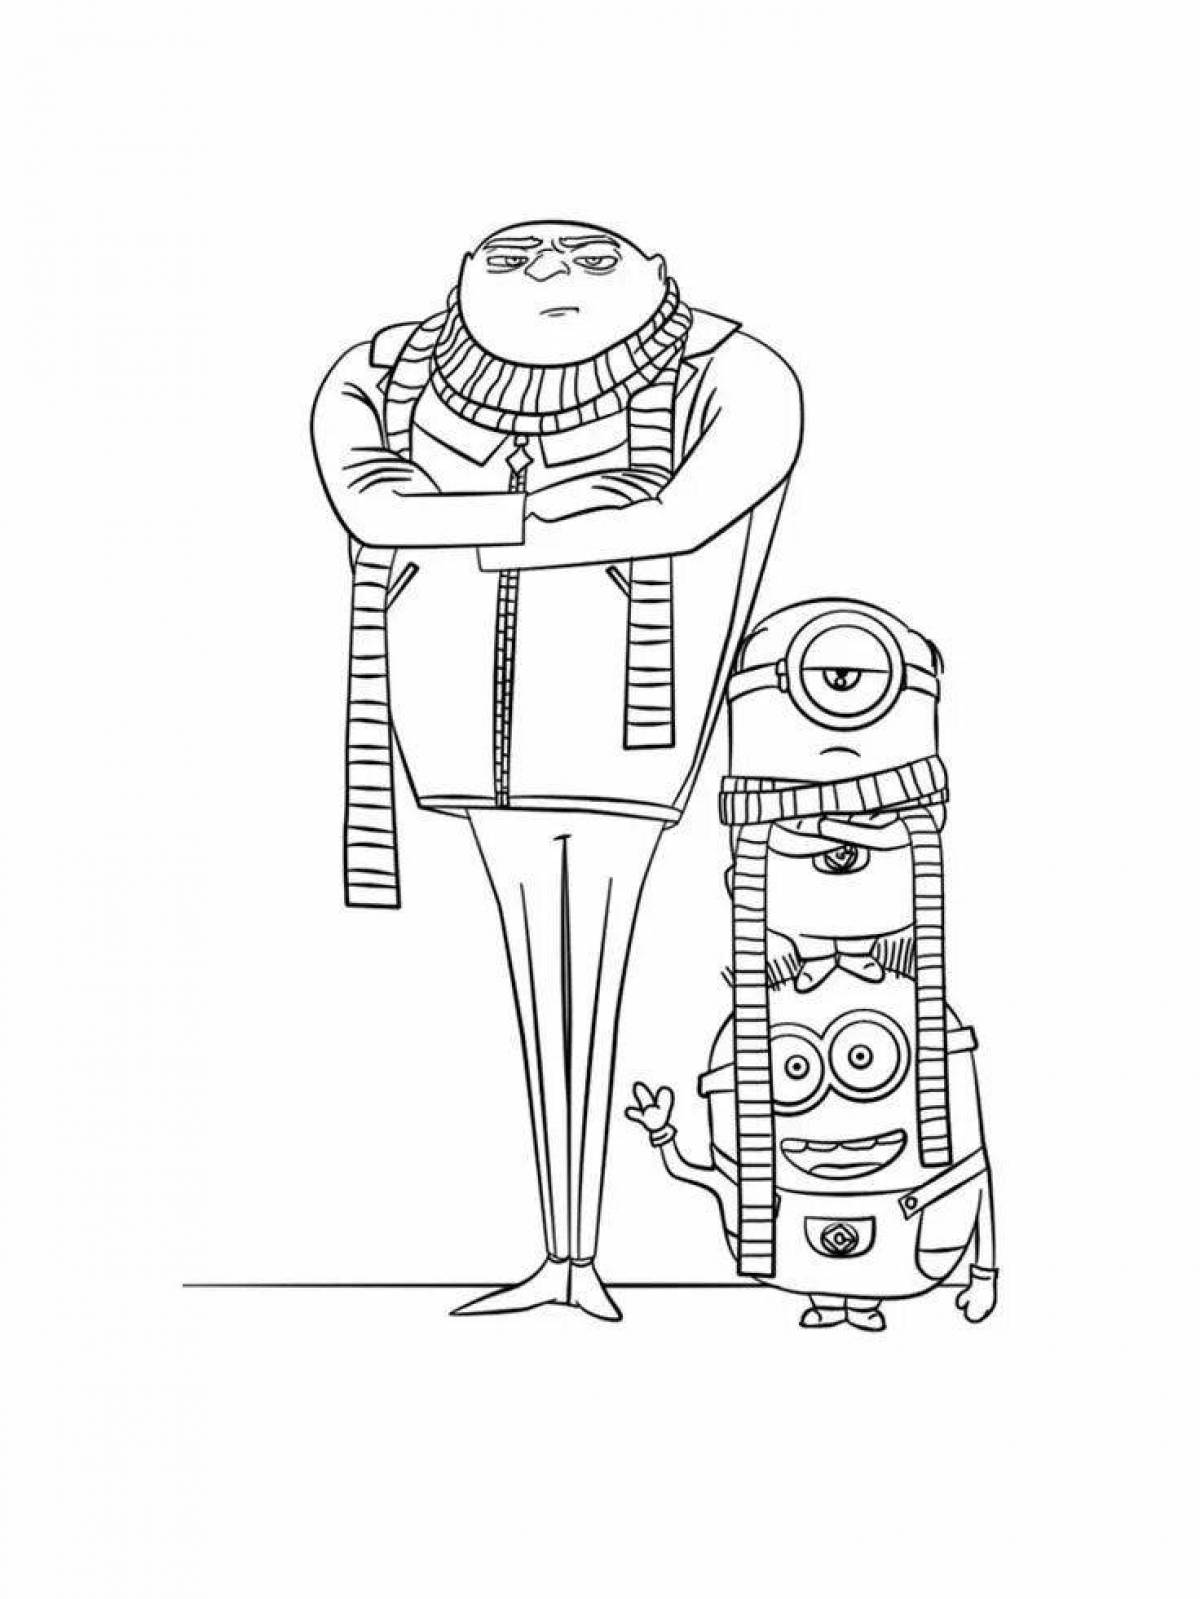 Gru Vibrant Coloring Page